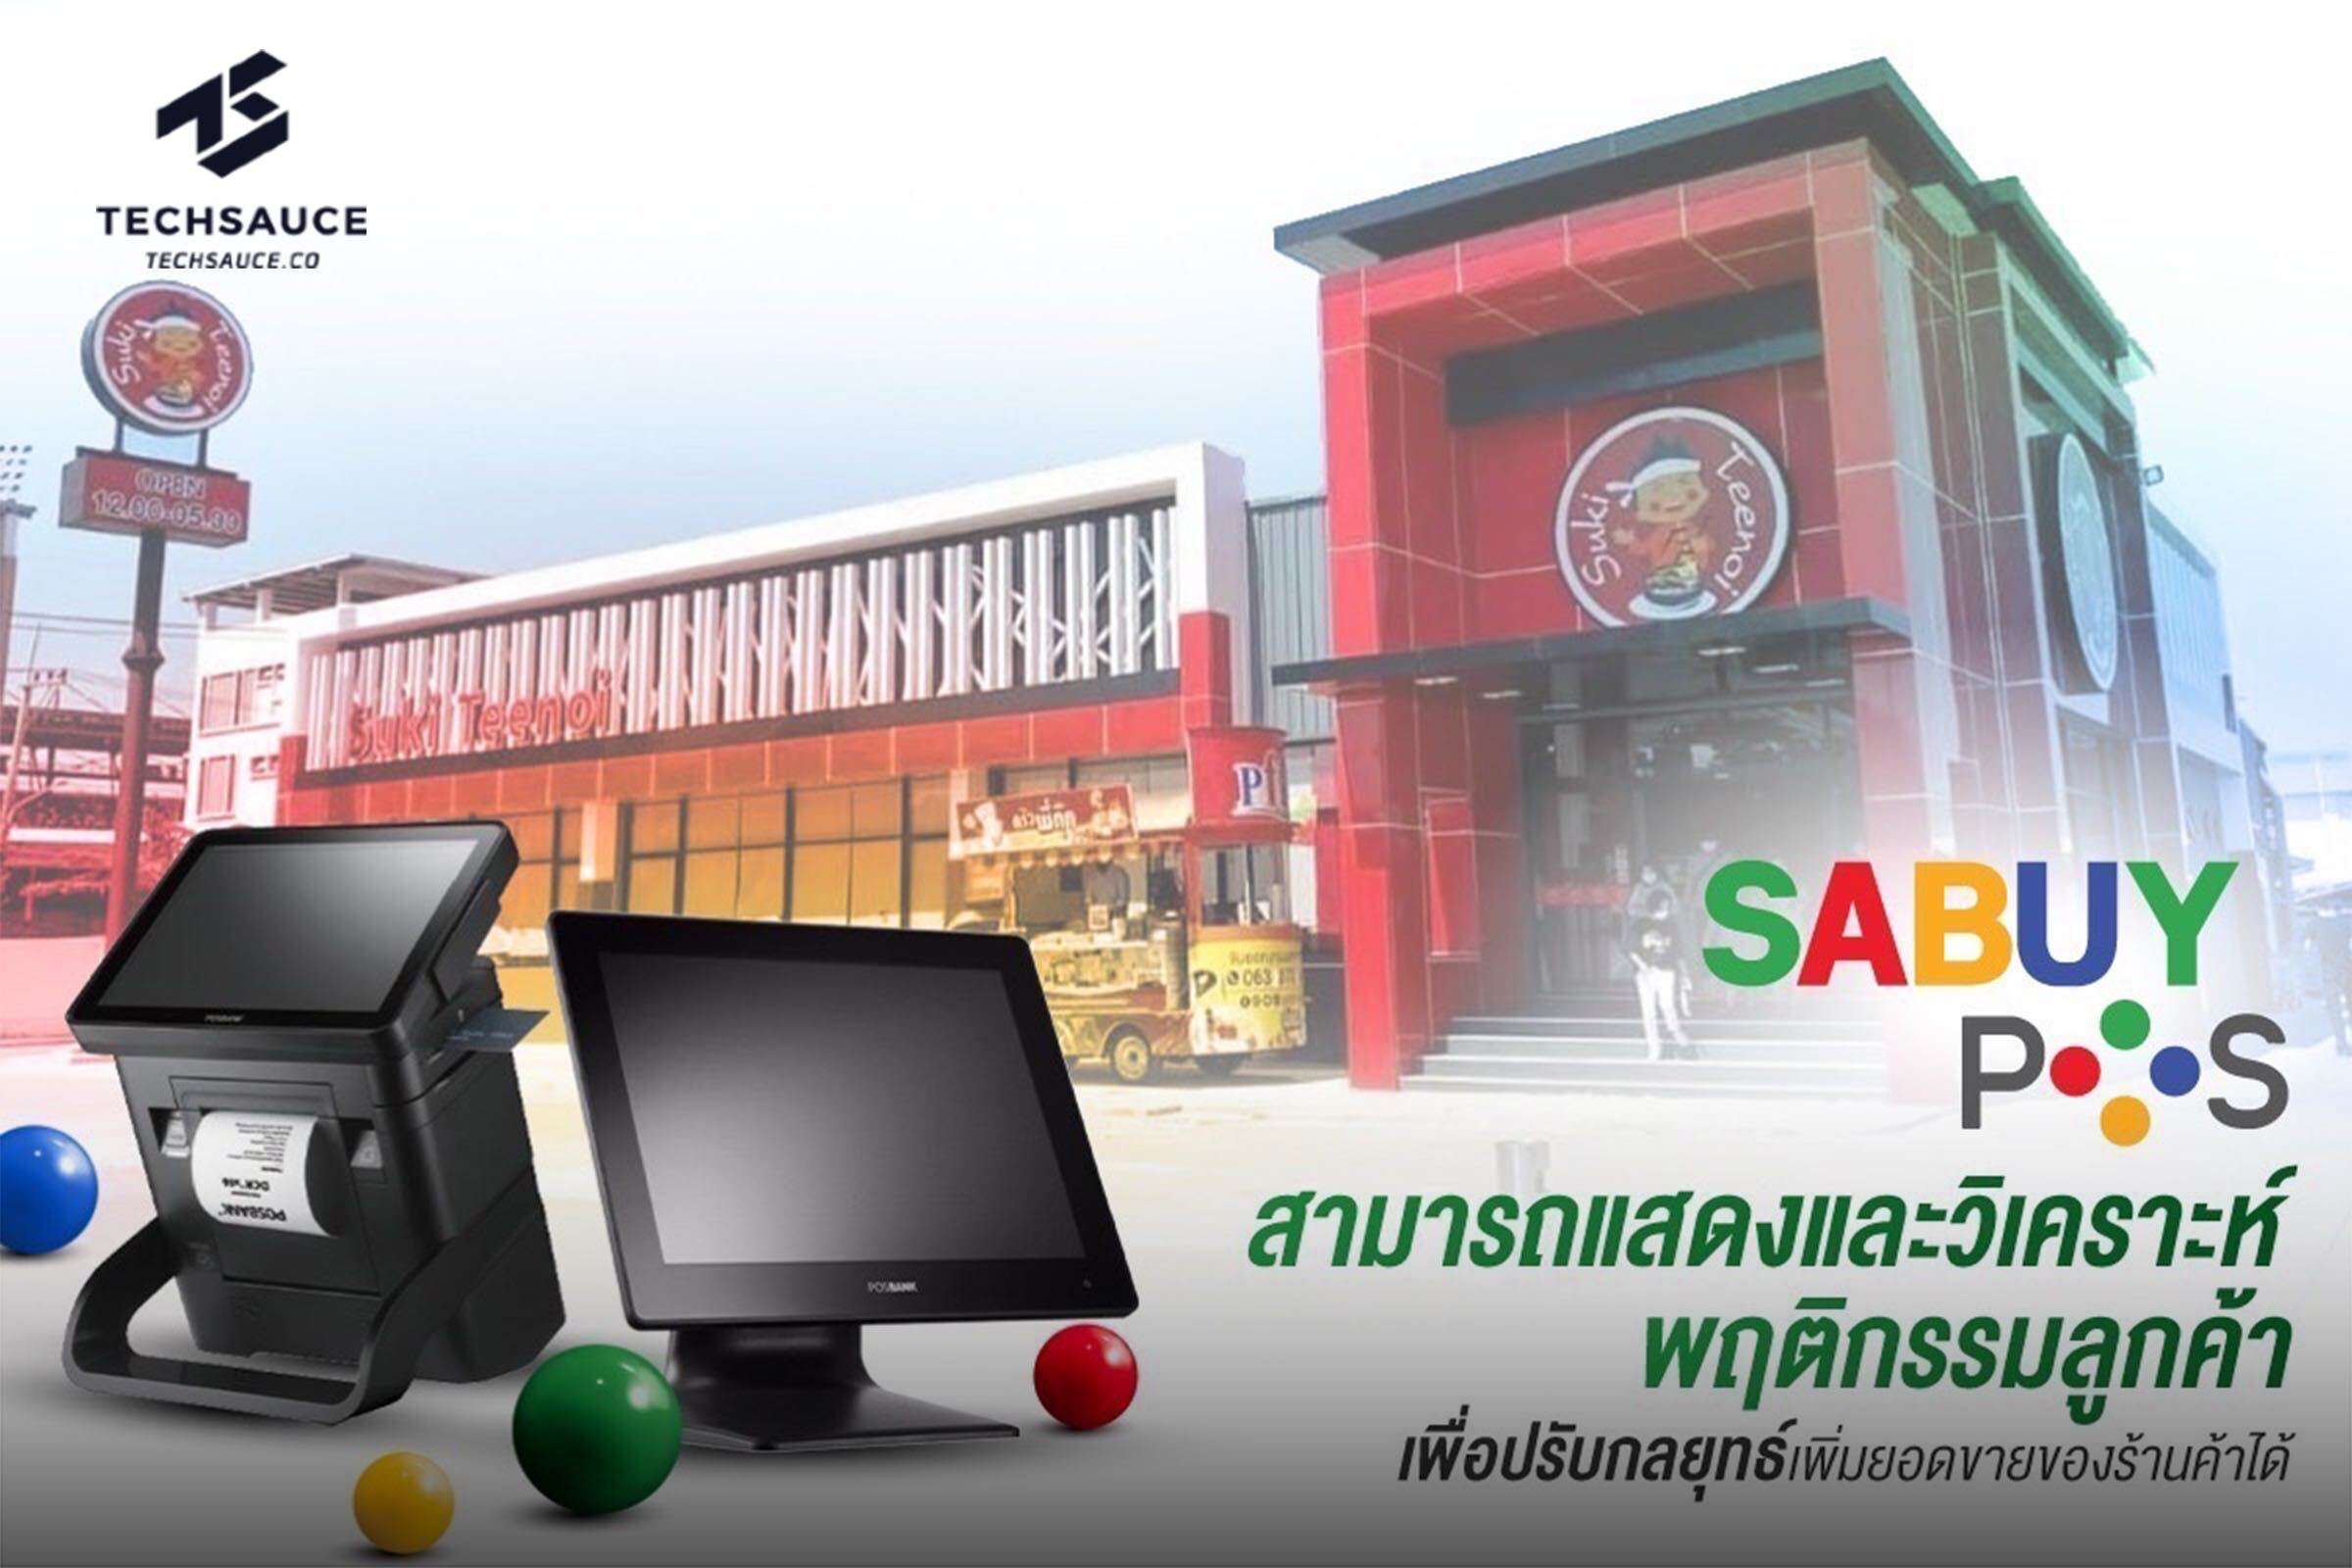 SABUY POS: the right solution for business